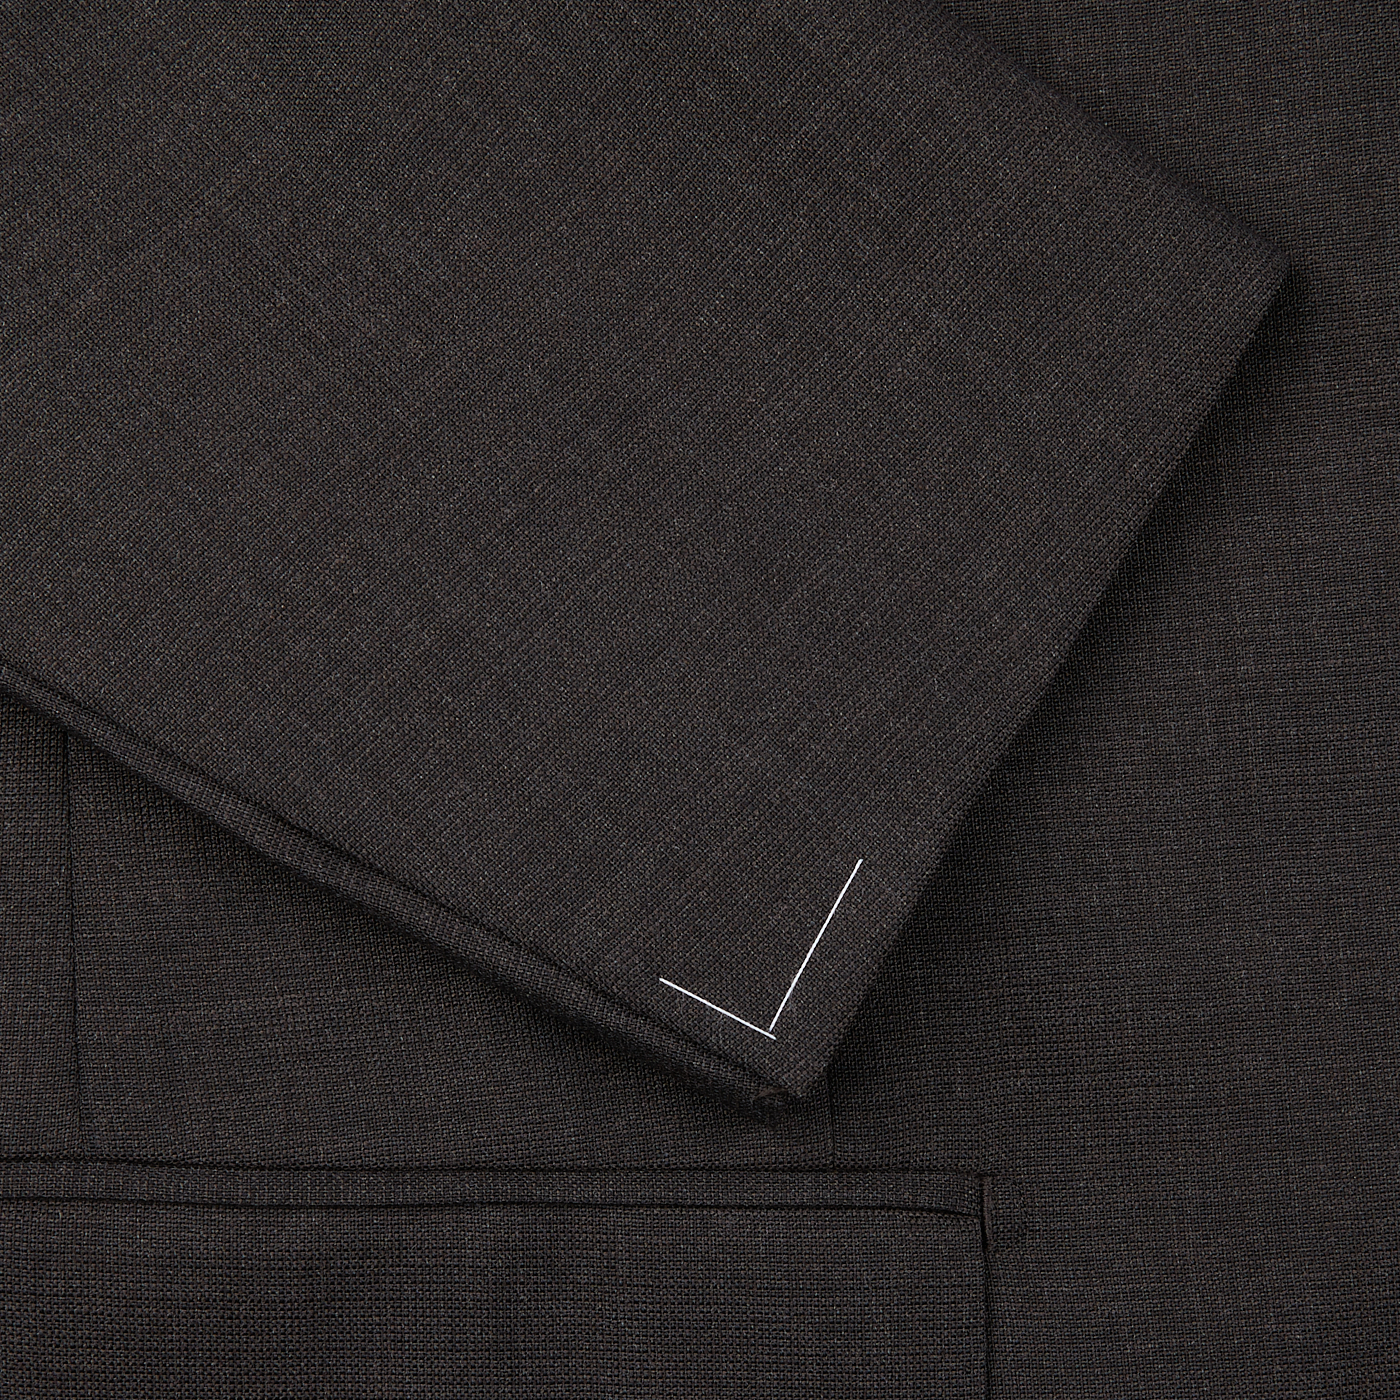 Close-up of Ring Jacket's dark brown high twist wool suit with visible weave pattern and white threads on the edge.